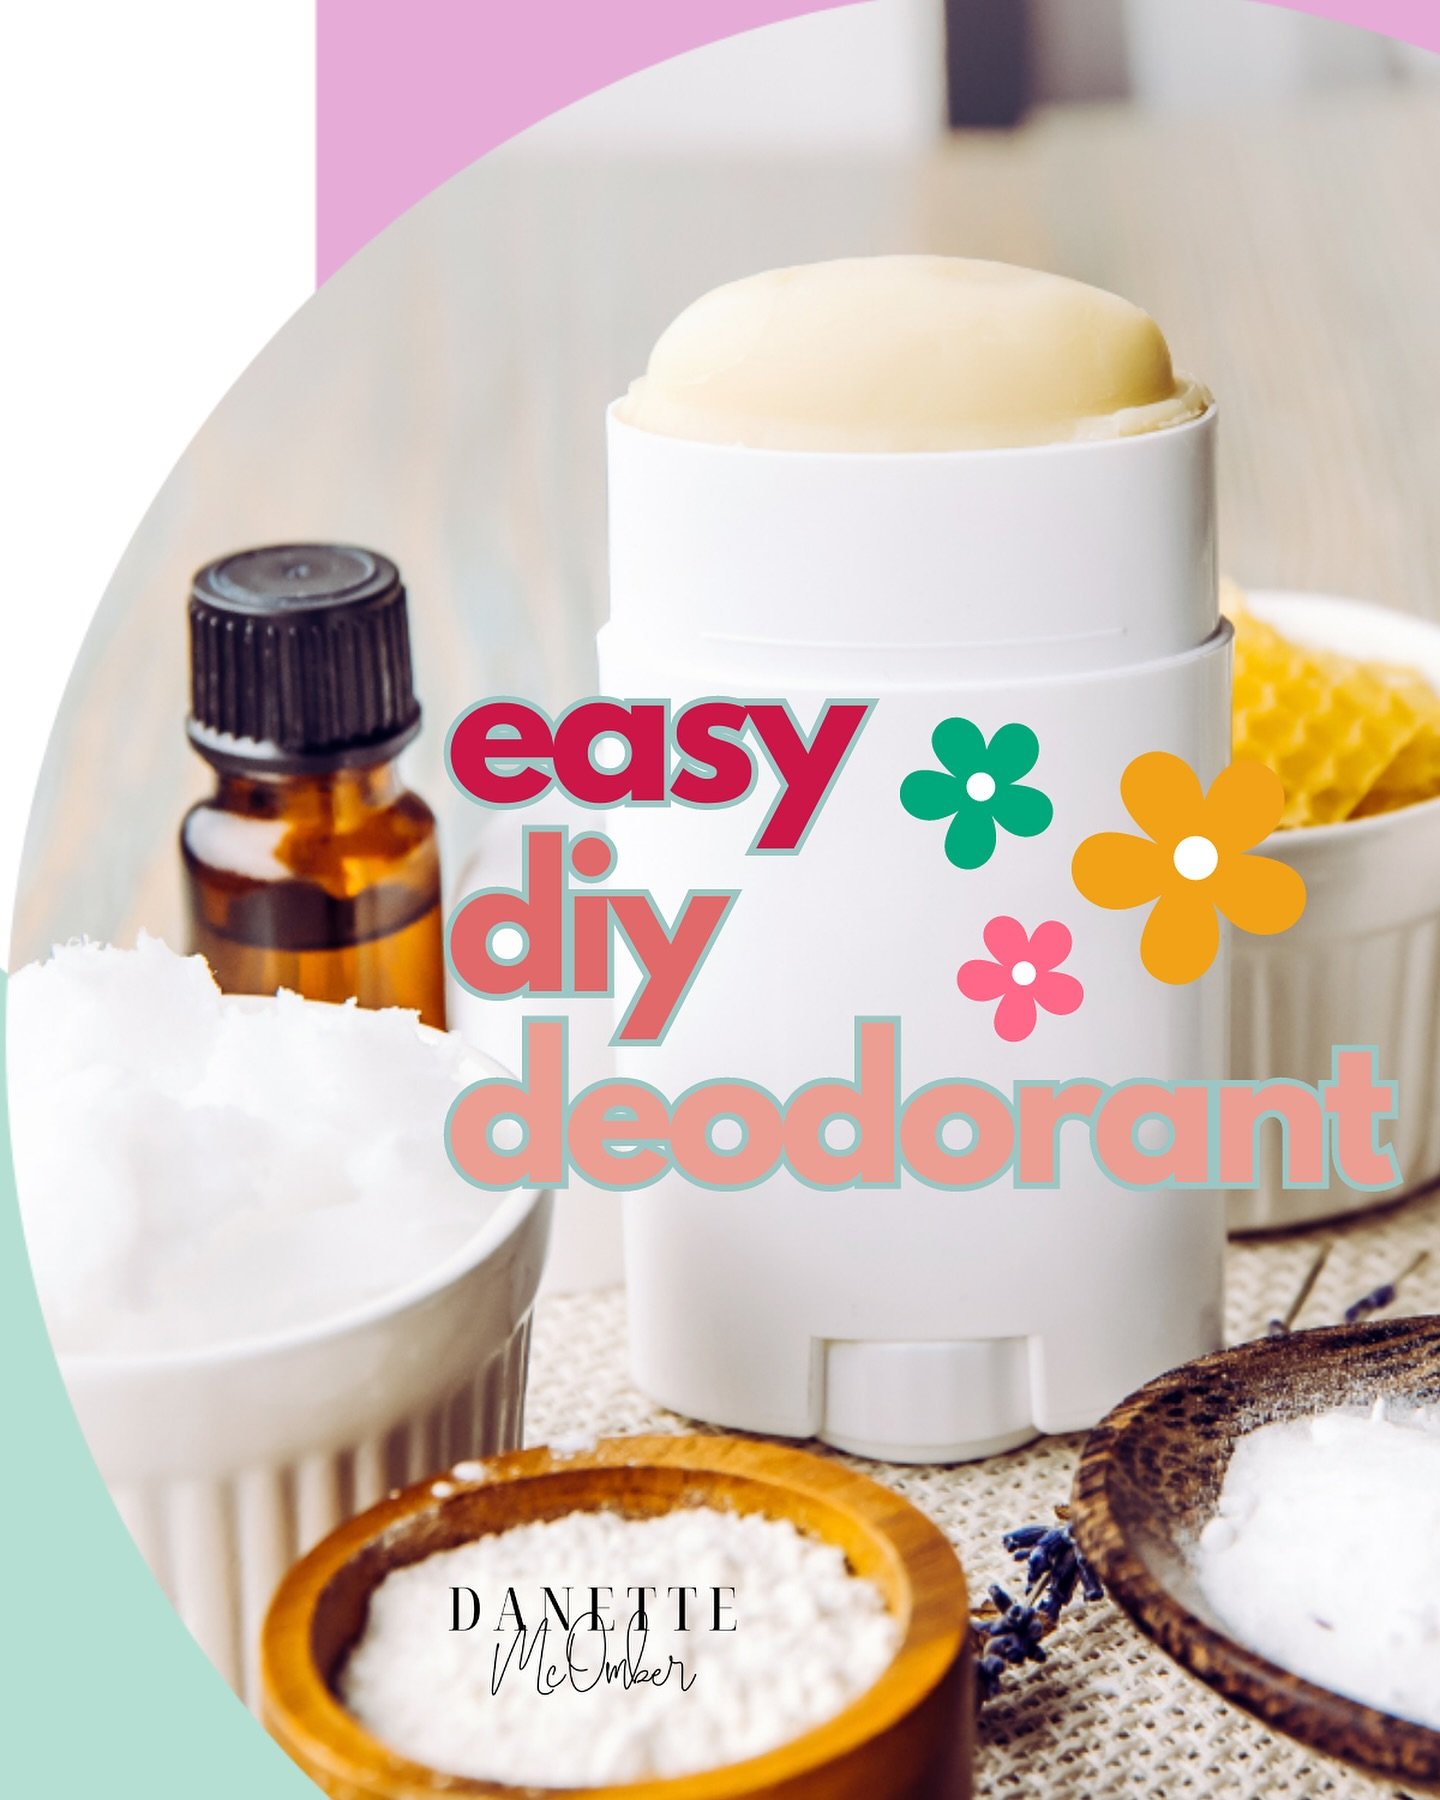 Ready to ditch the chemicals and save some money? Let&rsquo;s talk about the advantages of using aluminum-free deodorant and how you can easily make your own! 🌿✨ Not only is aluminum-free deodorant better for your body, but making it yourself is sup